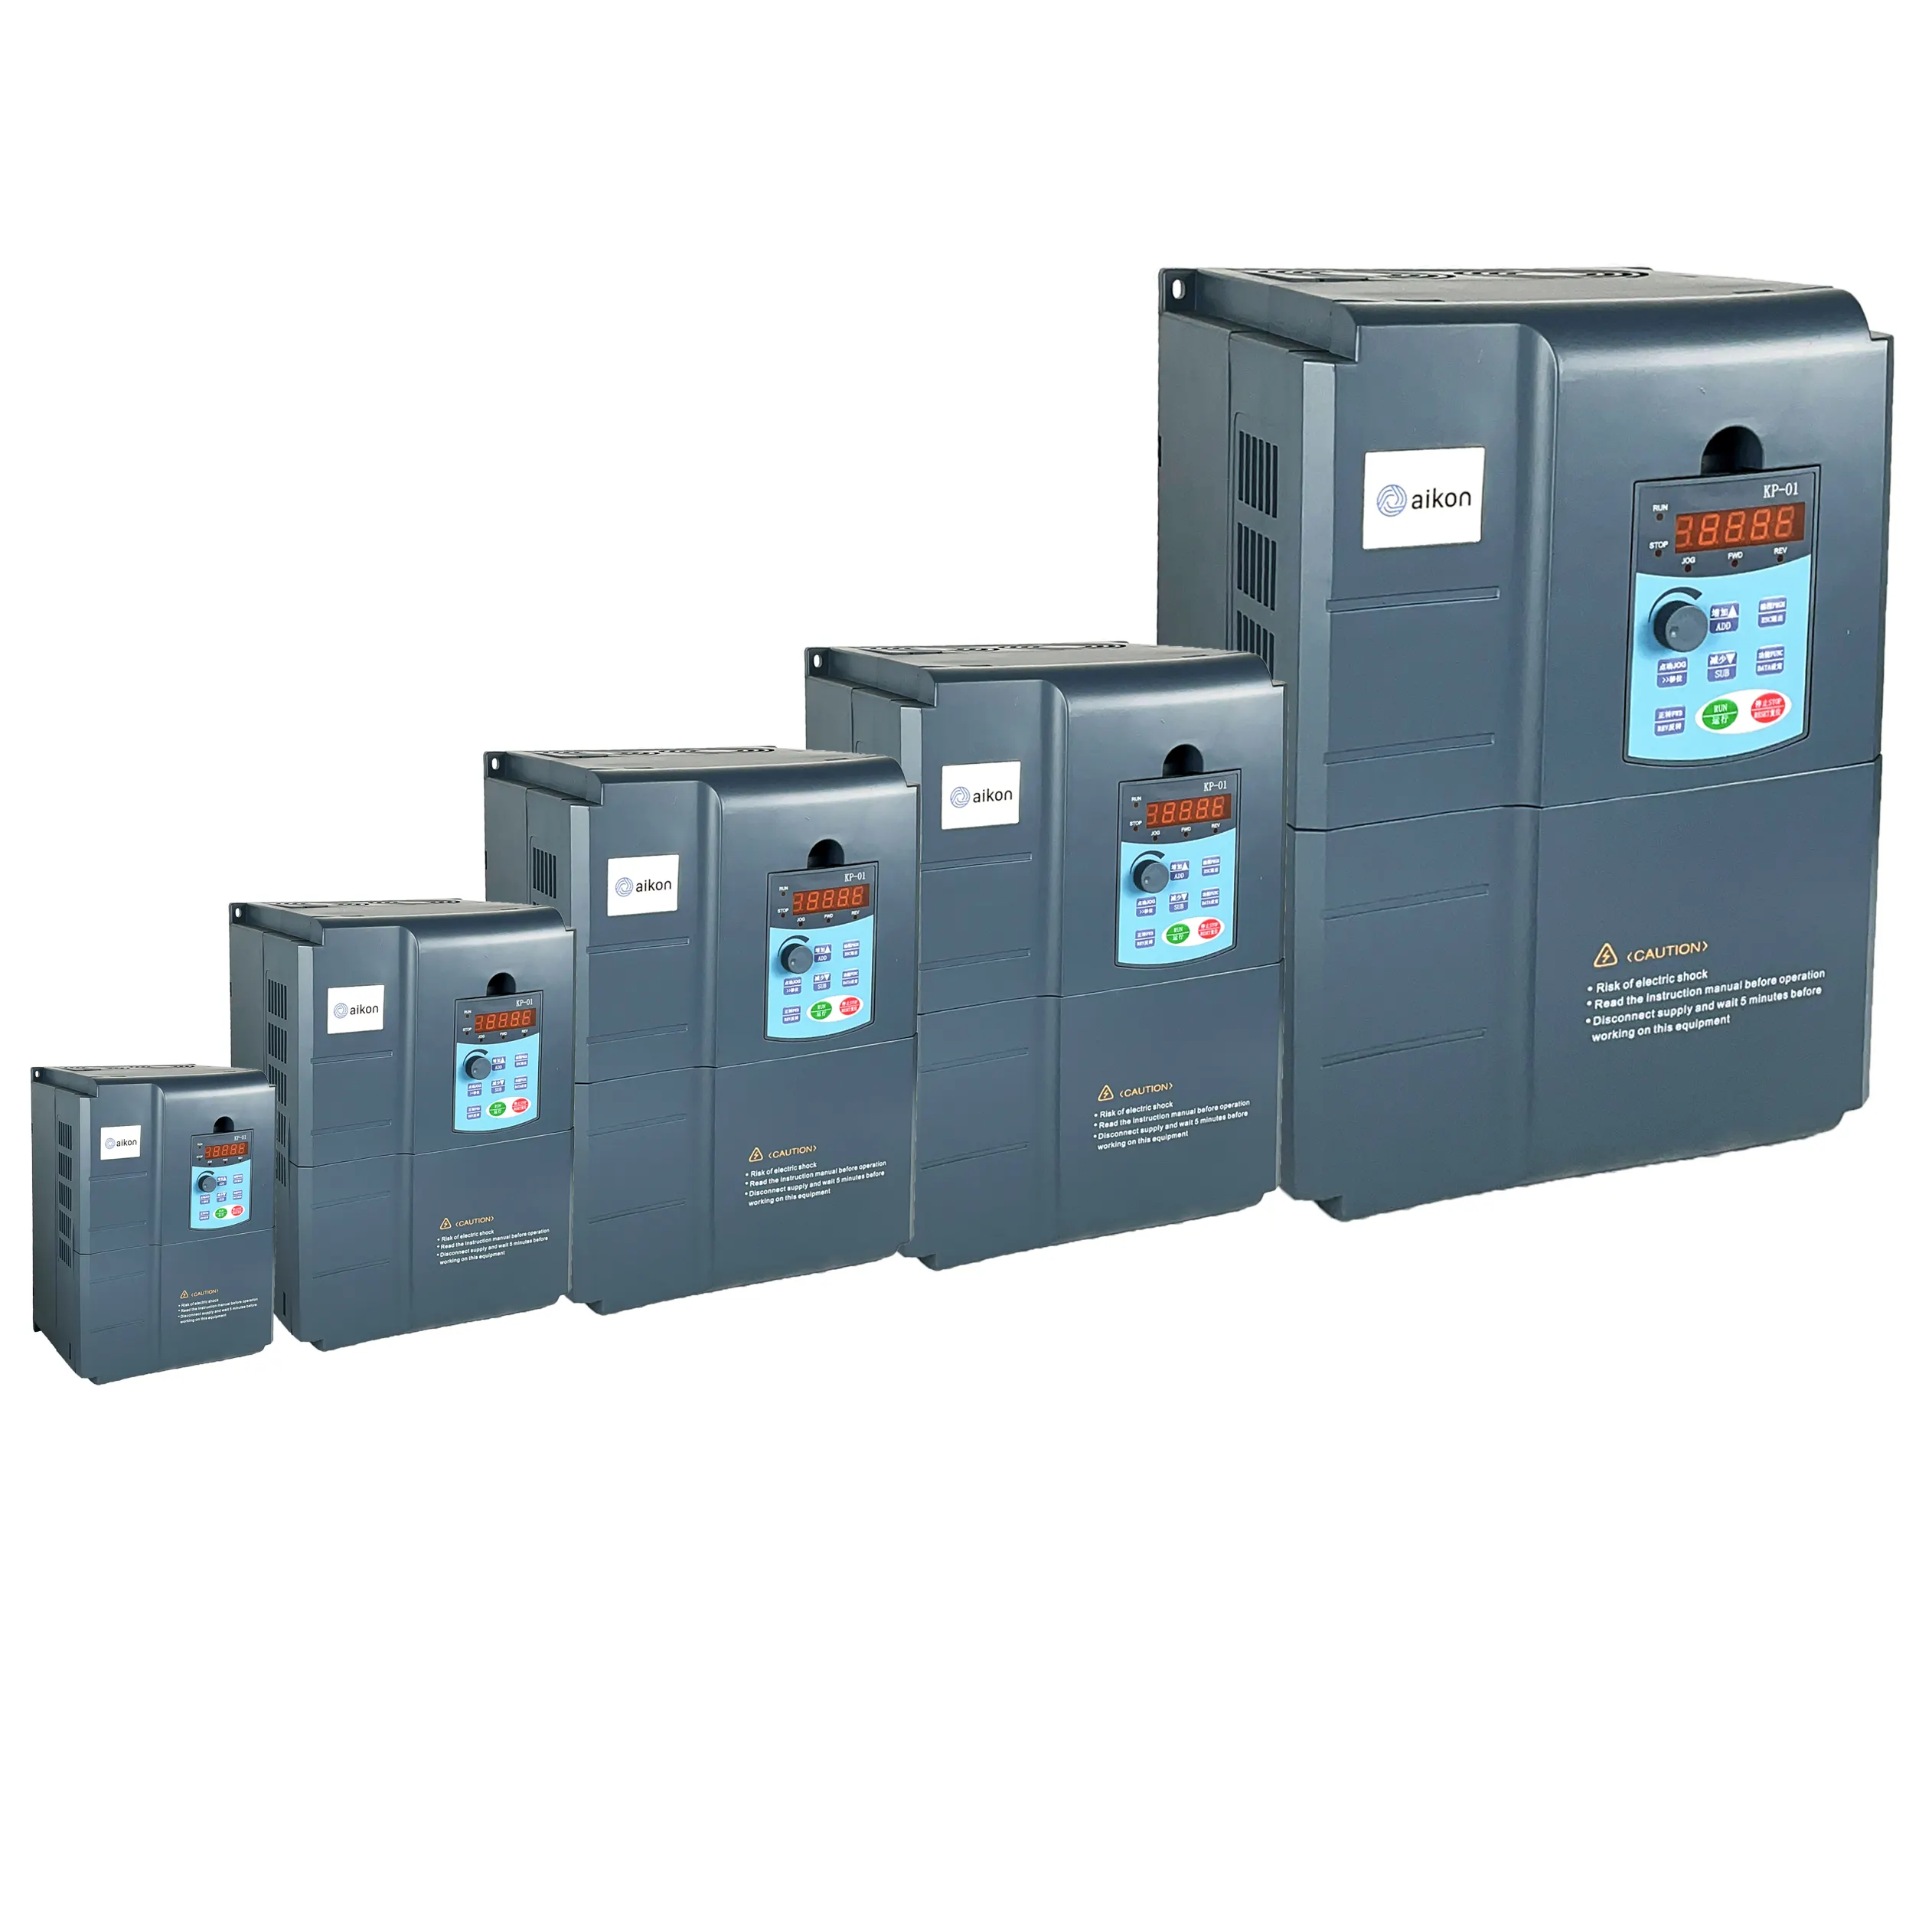 IP55 aikon 2.2kw dry running protection variable frequency inverter vfd control water pump